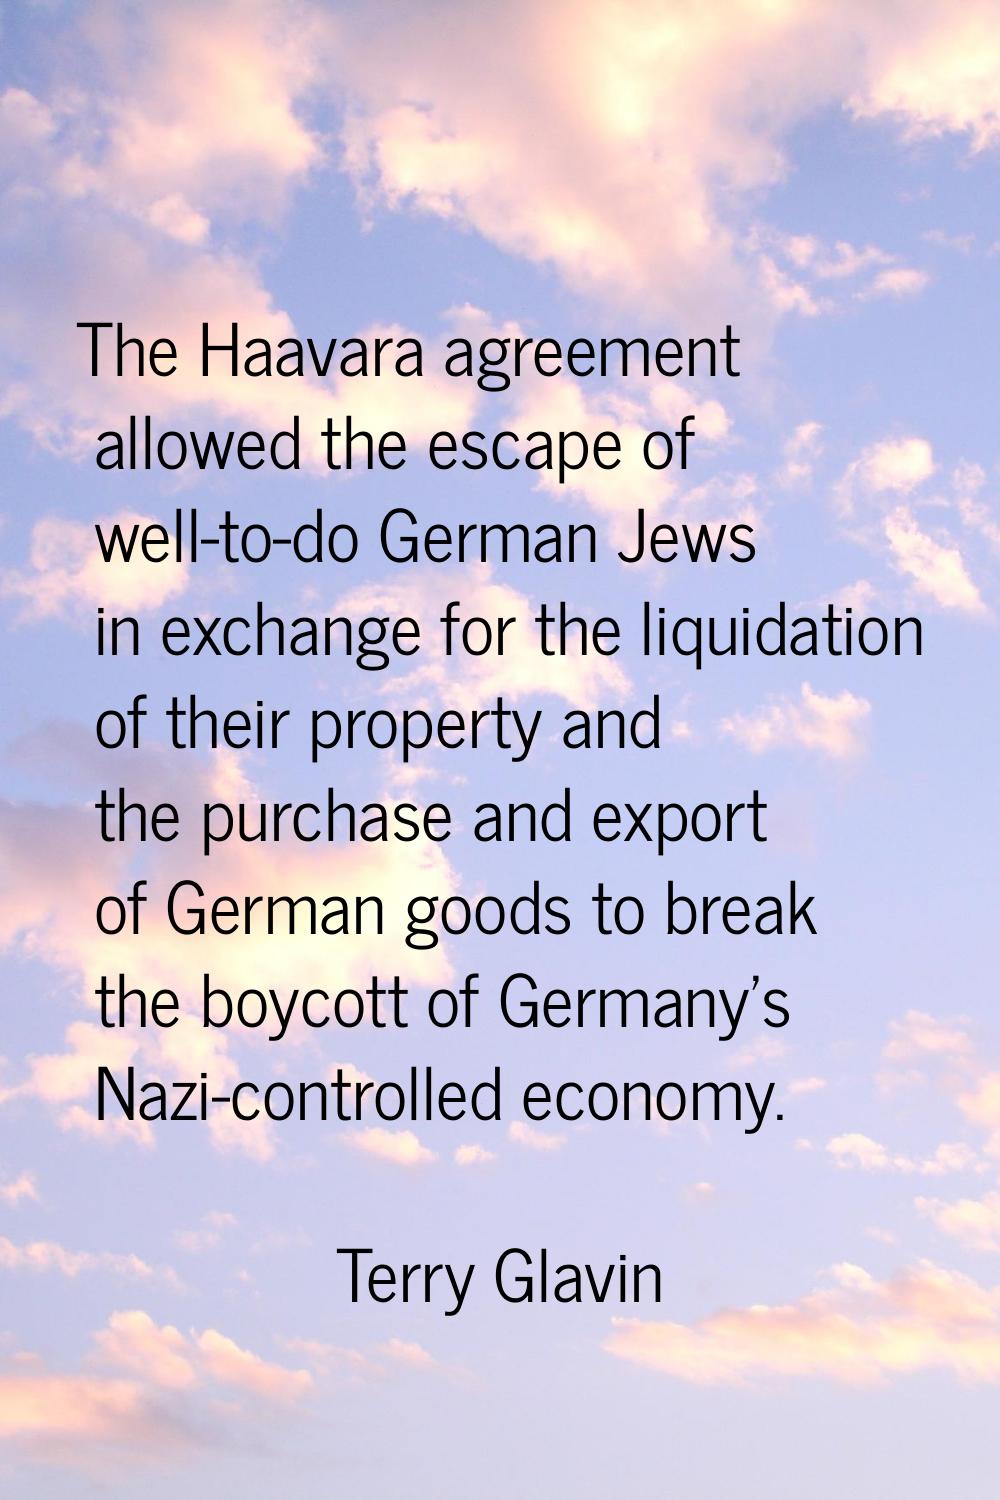 The Haavara agreement allowed the escape of well-to-do German Jews in exchange for the liquidation 